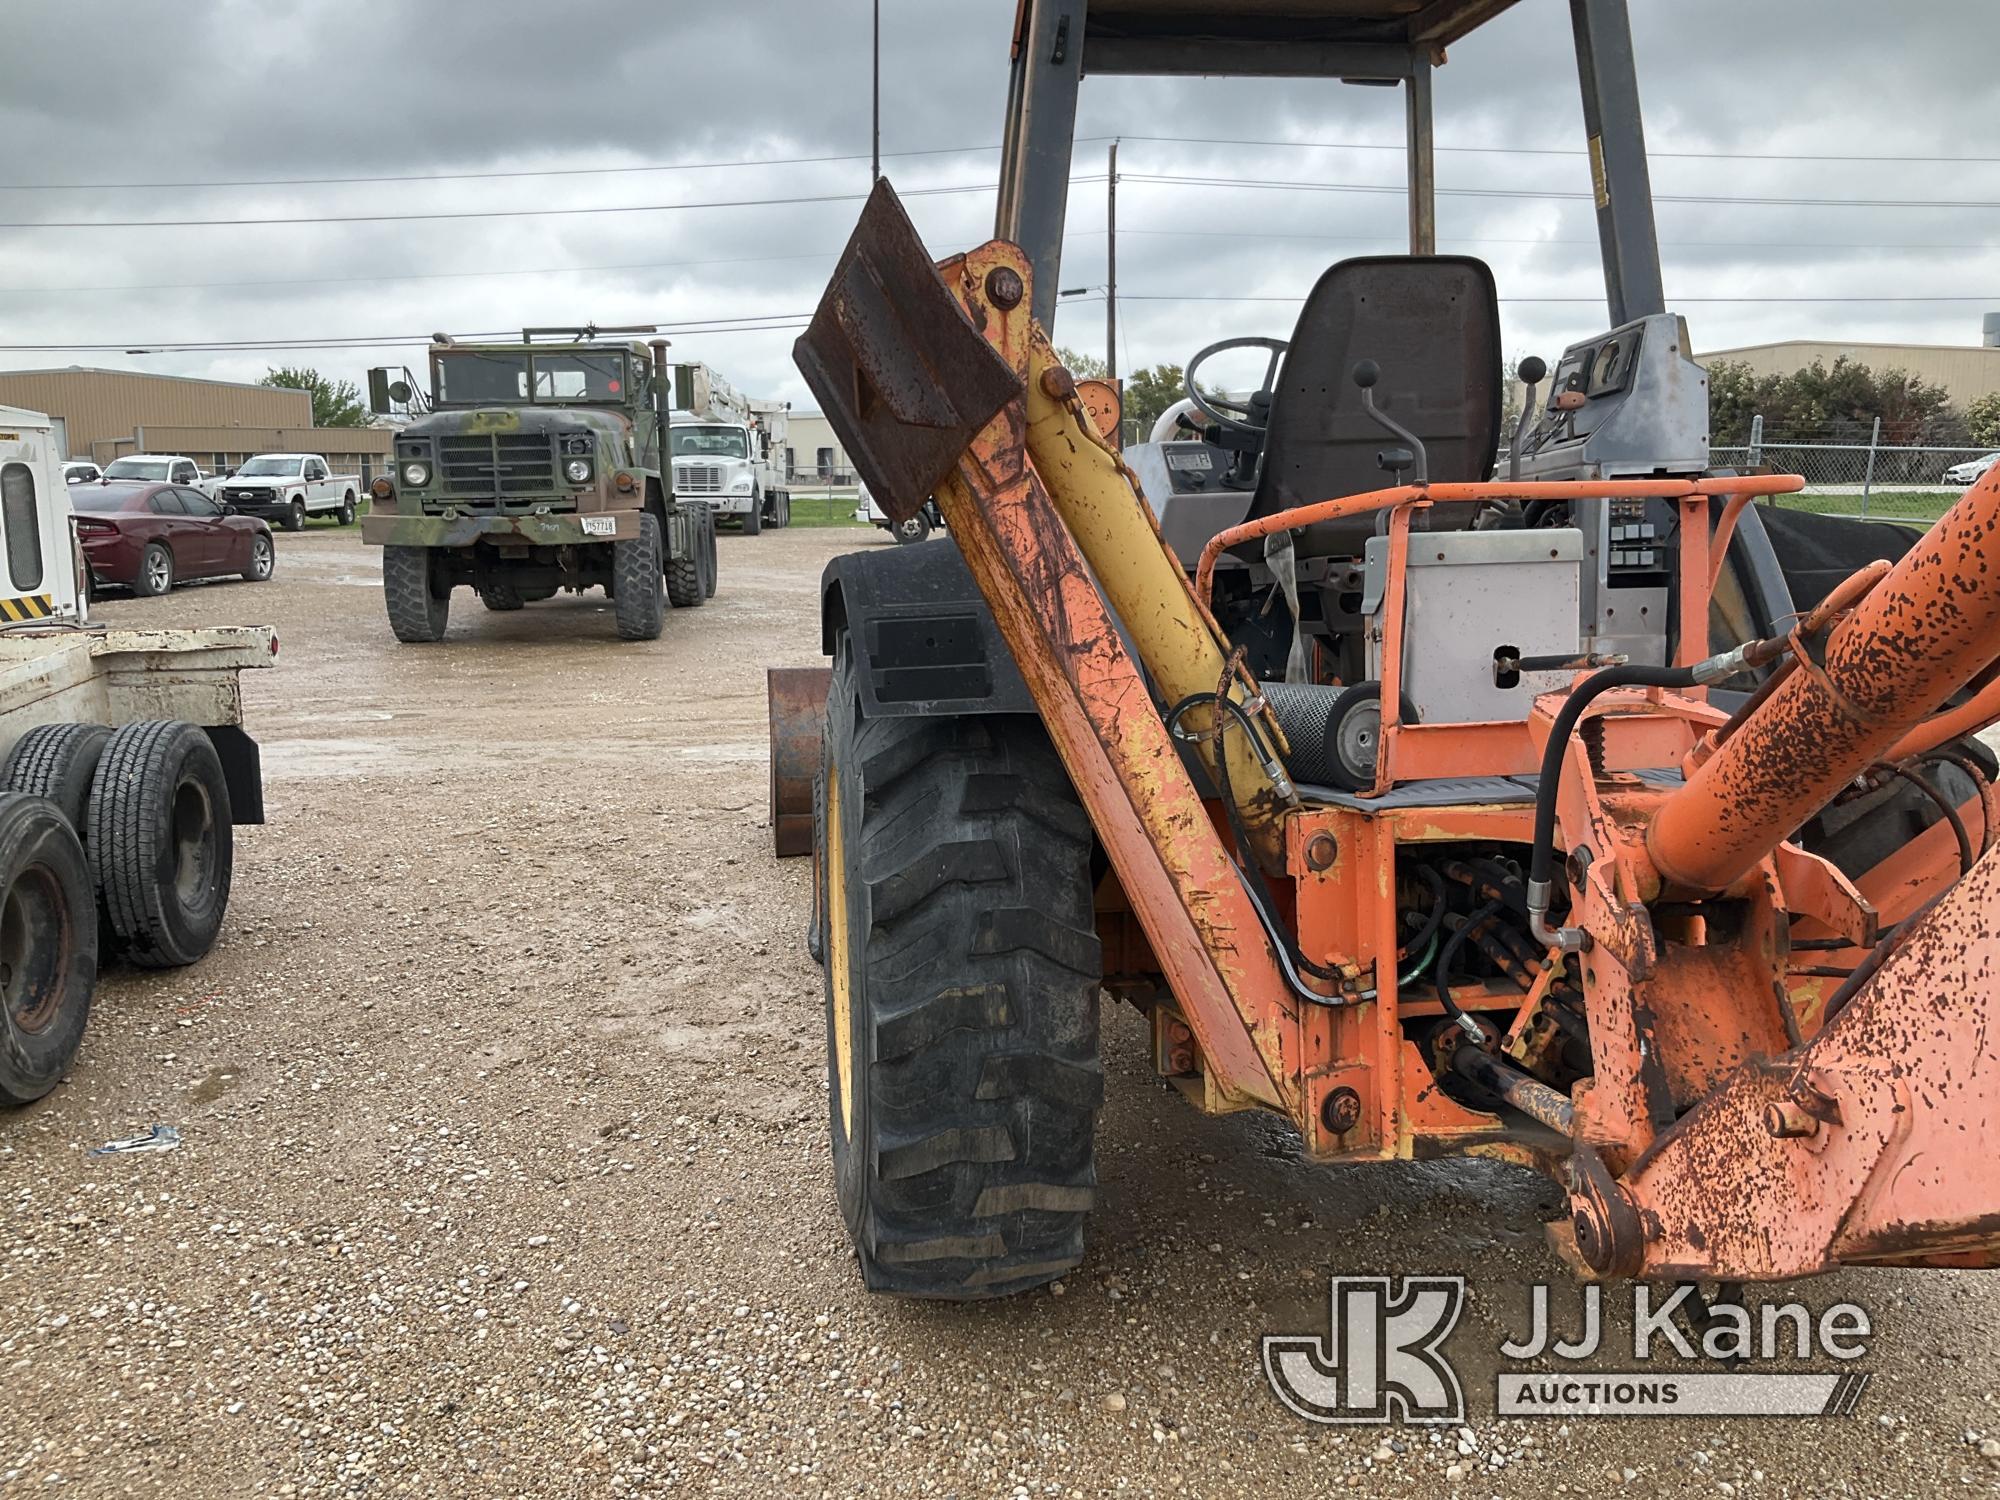 (Waxahachie, TX) 1992 Ford 555C Tractor Loader Backhoe Not Running, Condition Unknown, Flat Tires) (